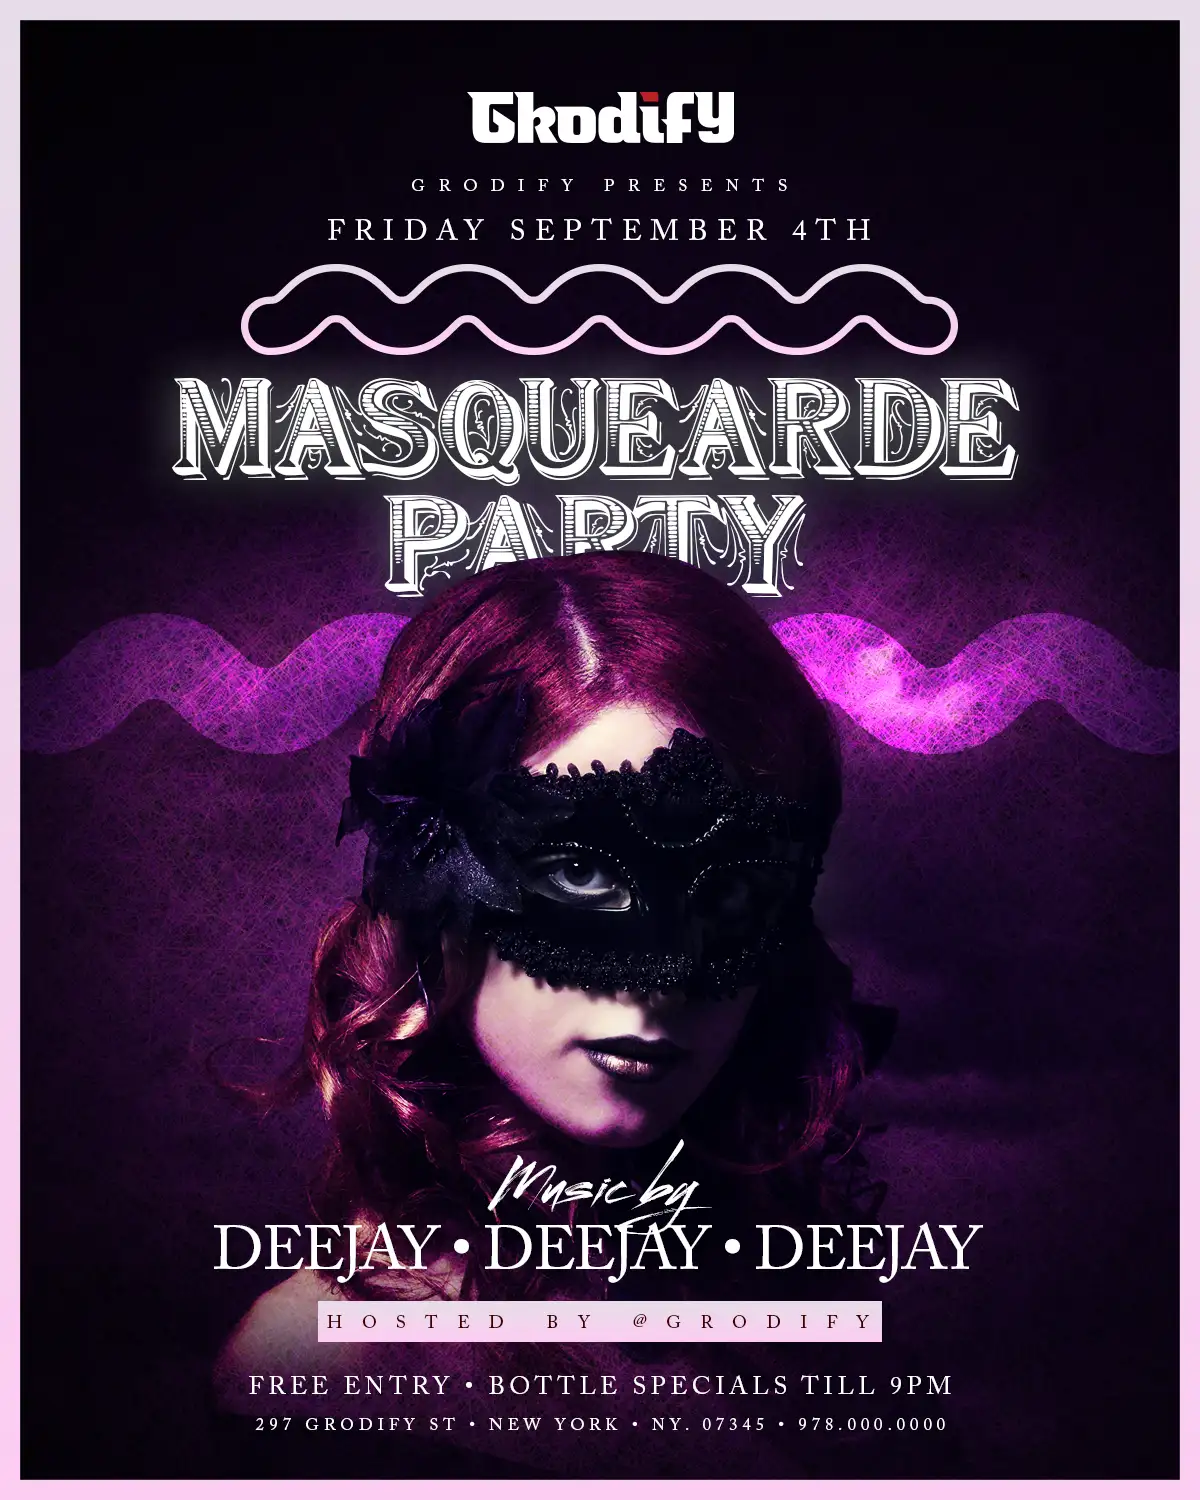 Masquearde Party